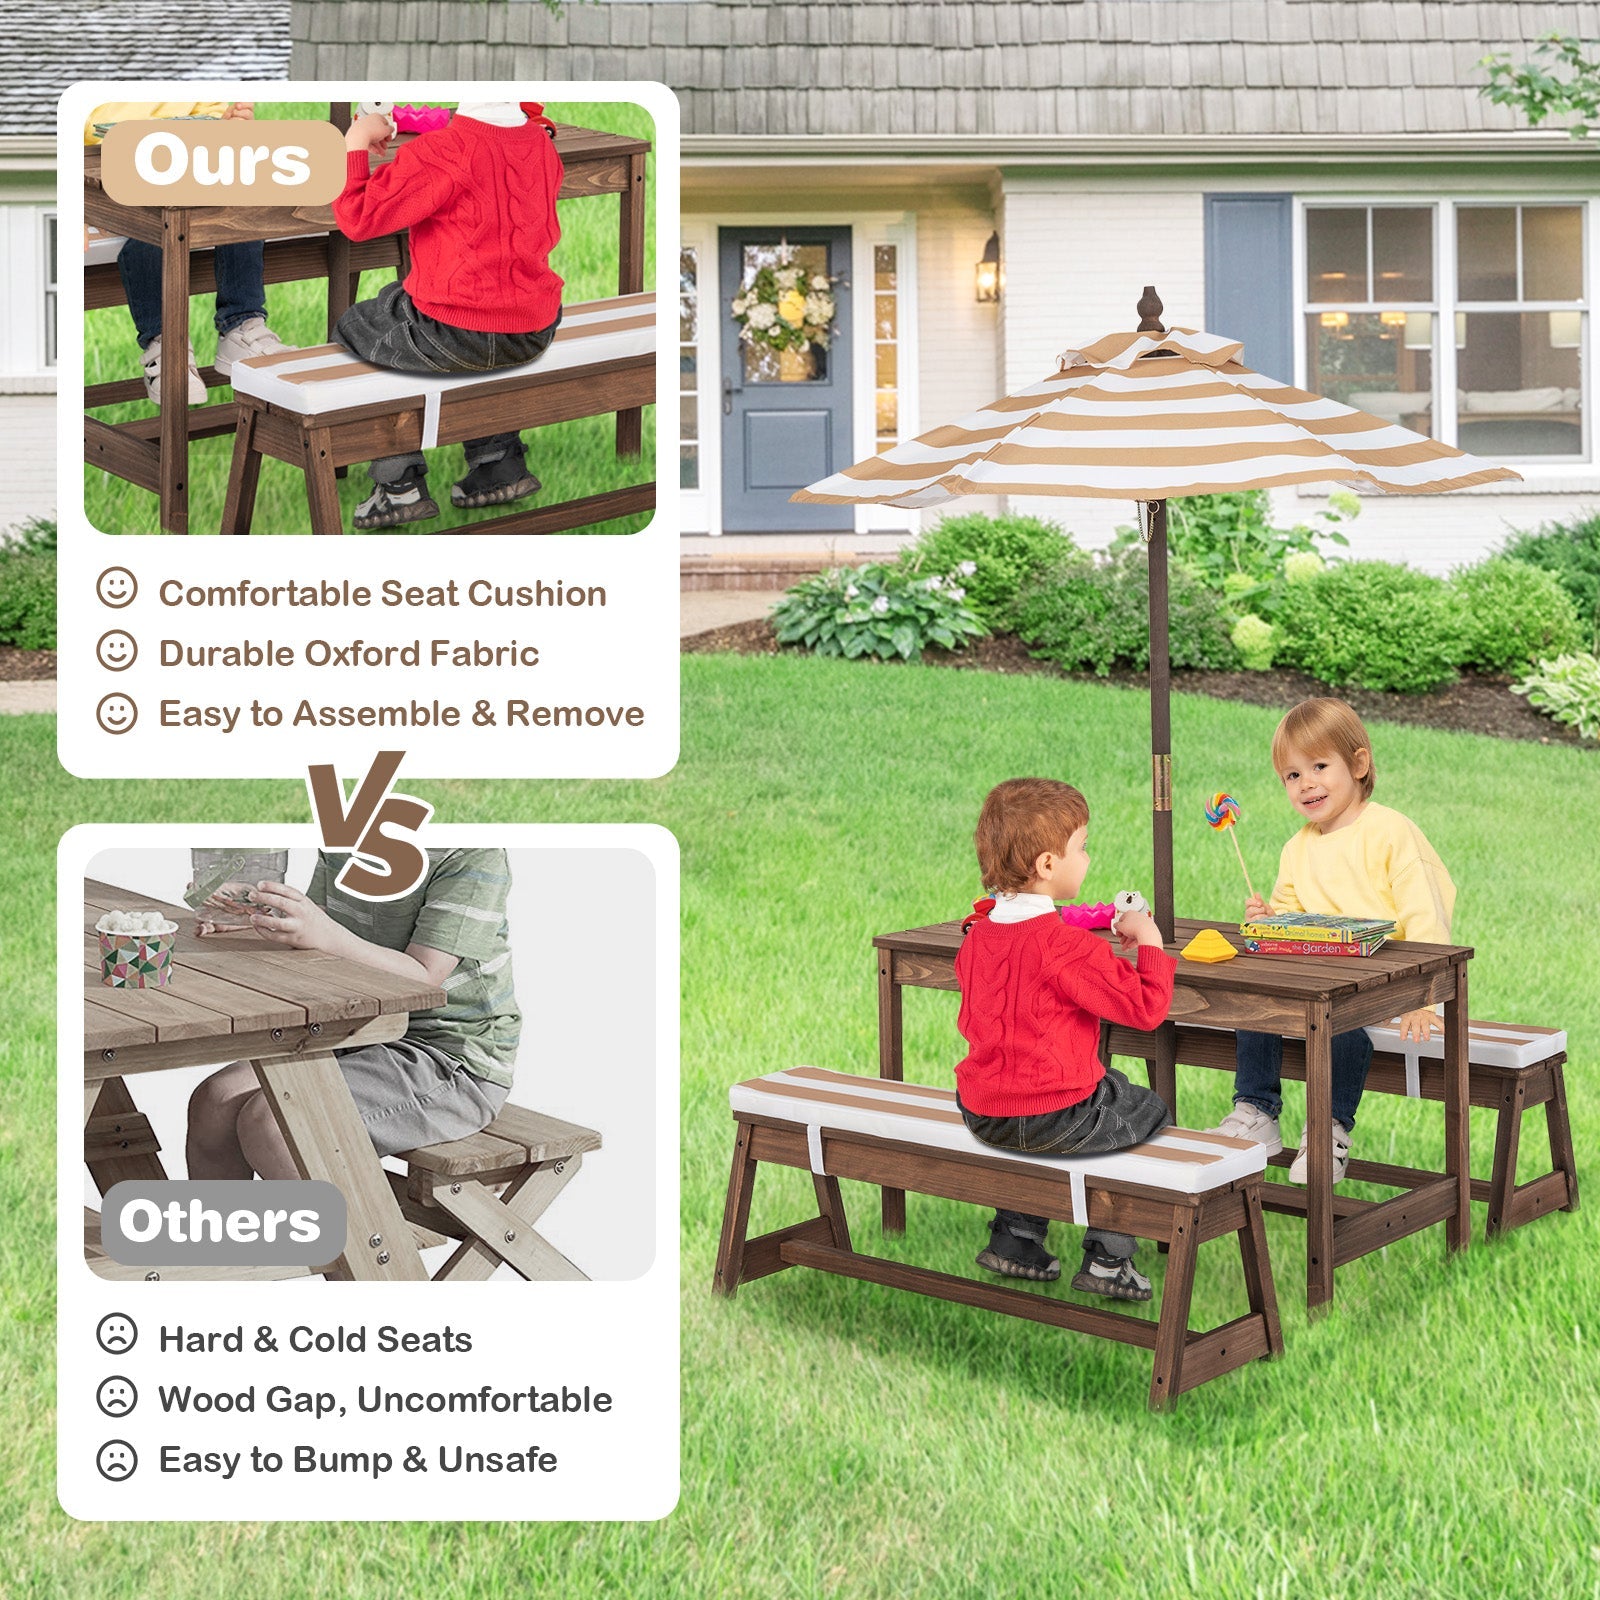 Kids Picnic Experience: Table, Bench, Umbrella & Cushions - Wholesome Play